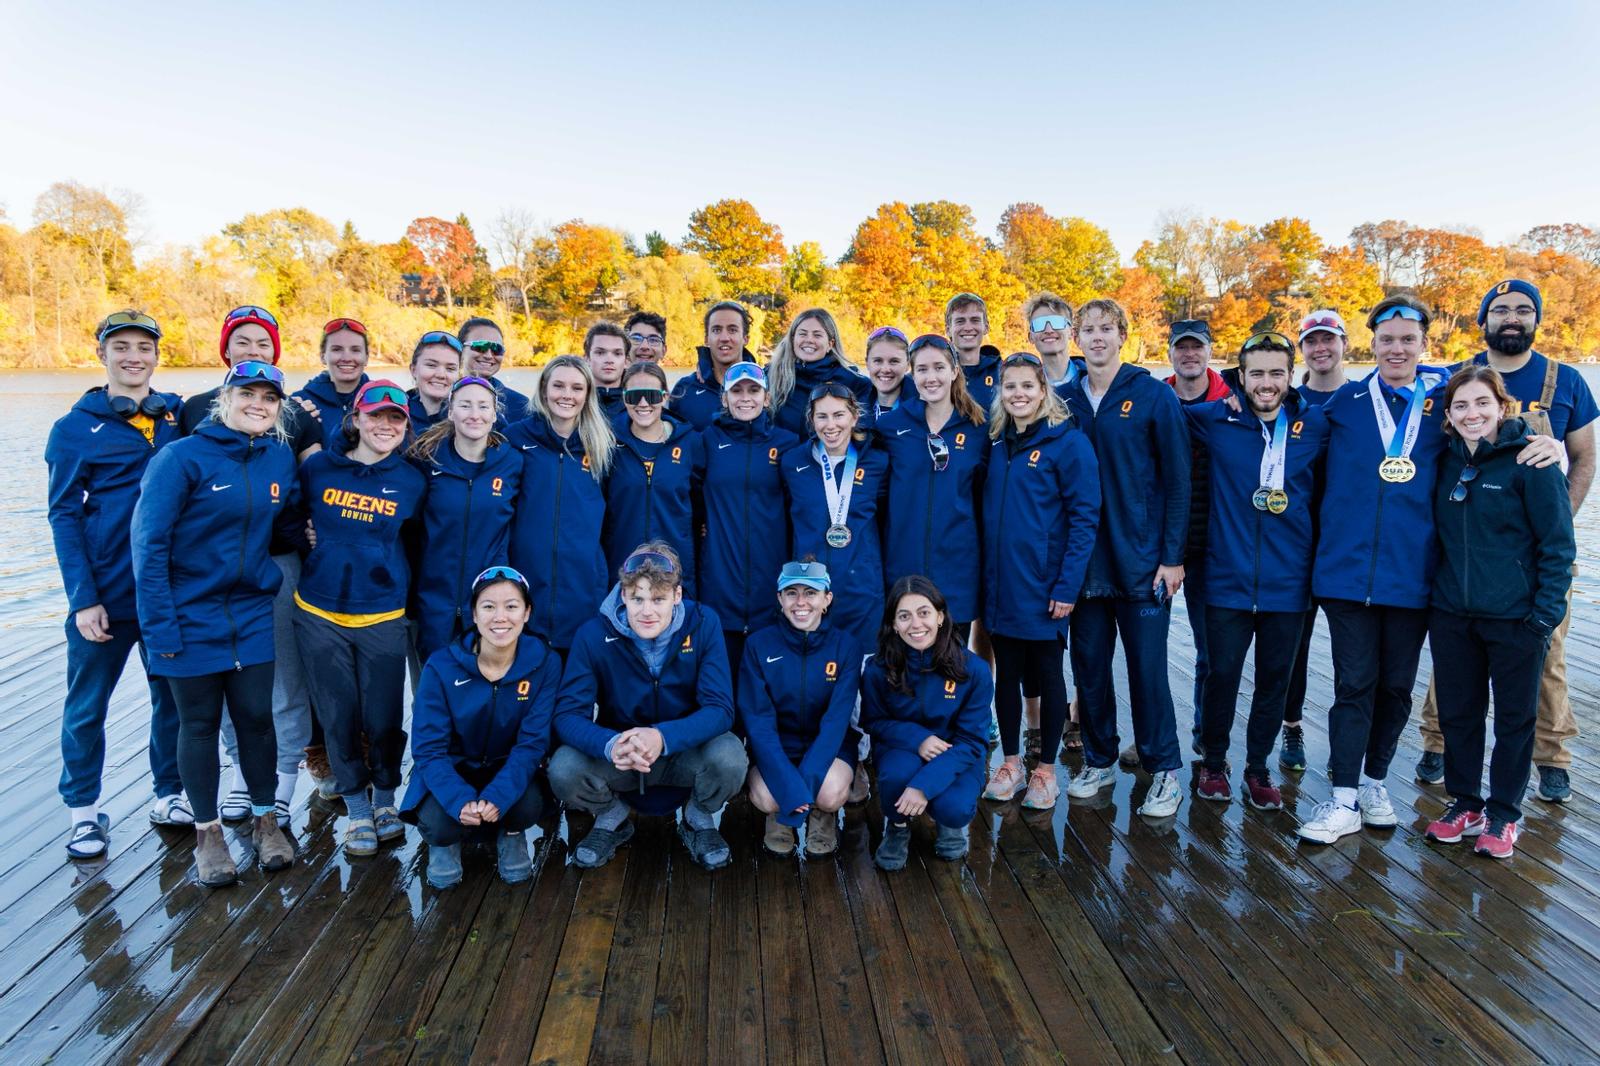 Donate to The Queen's Rowing Team Athletic Financial Awards